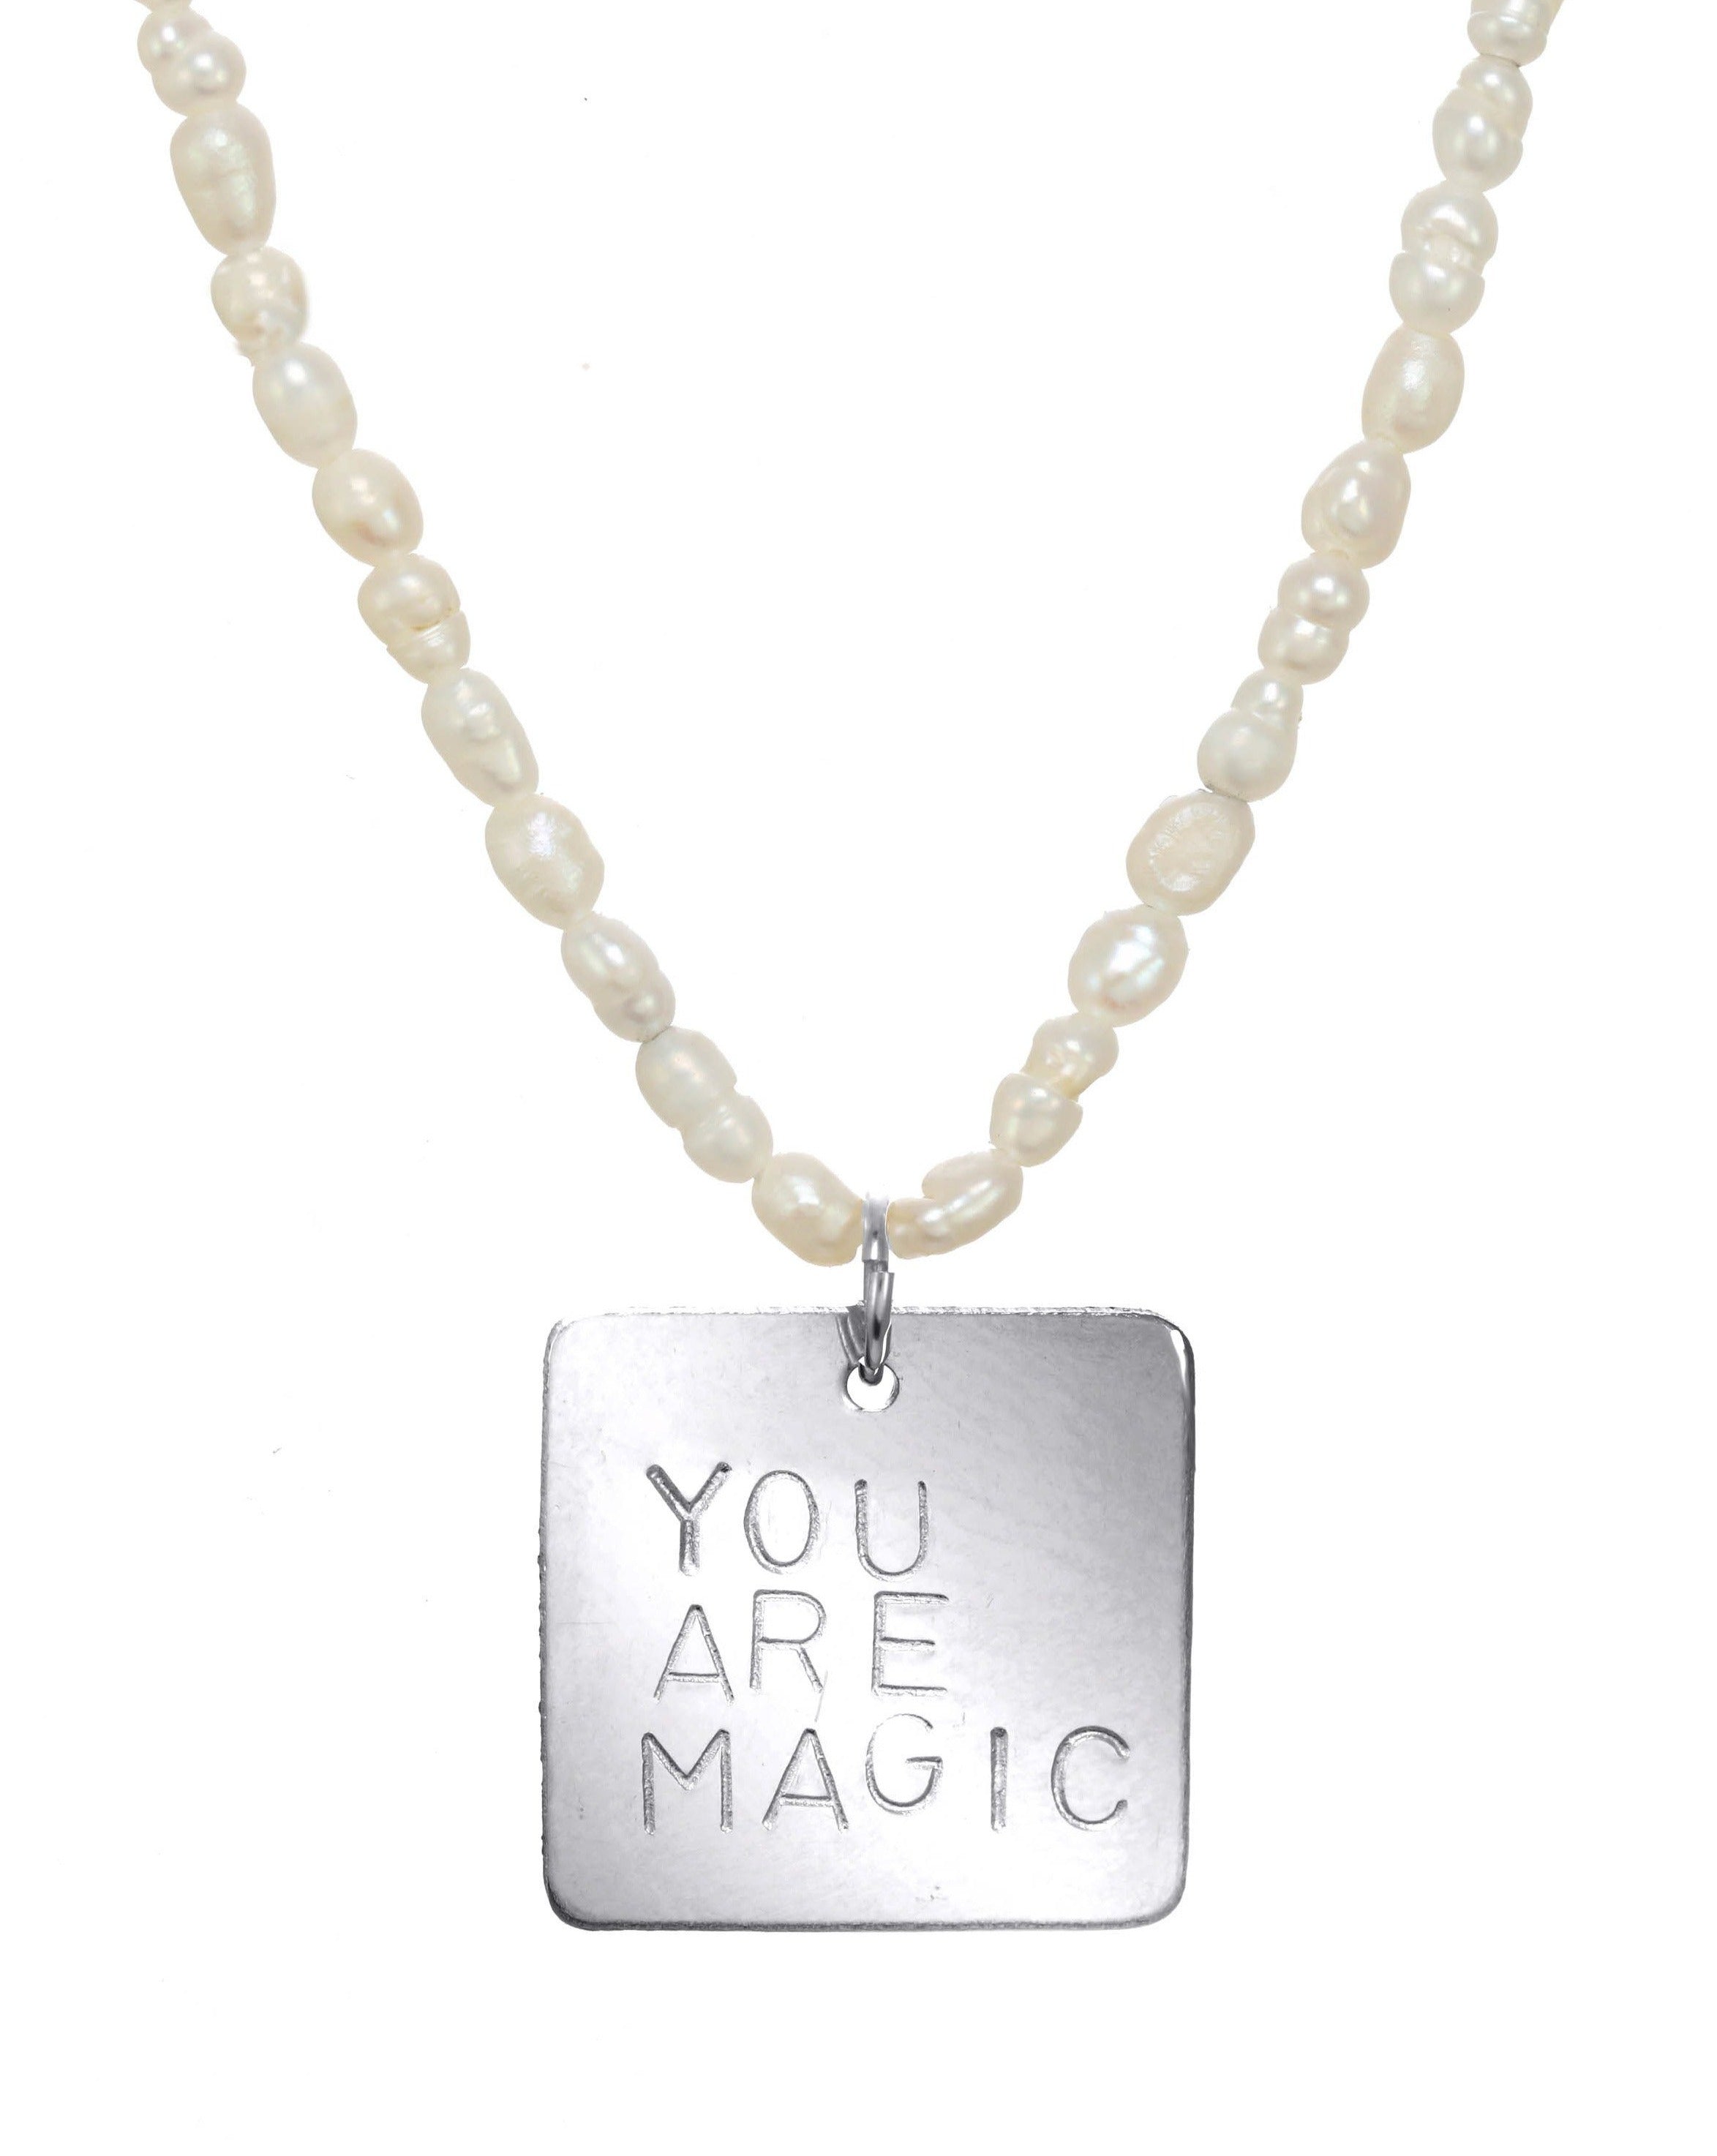 Magic Necklace by KOZAKH. A 16 to 18 inch adjustable length necklace with Freshwater rice Pearls strand, crafted in Sterling Silver, featuring a square pendant with an engraved quote.